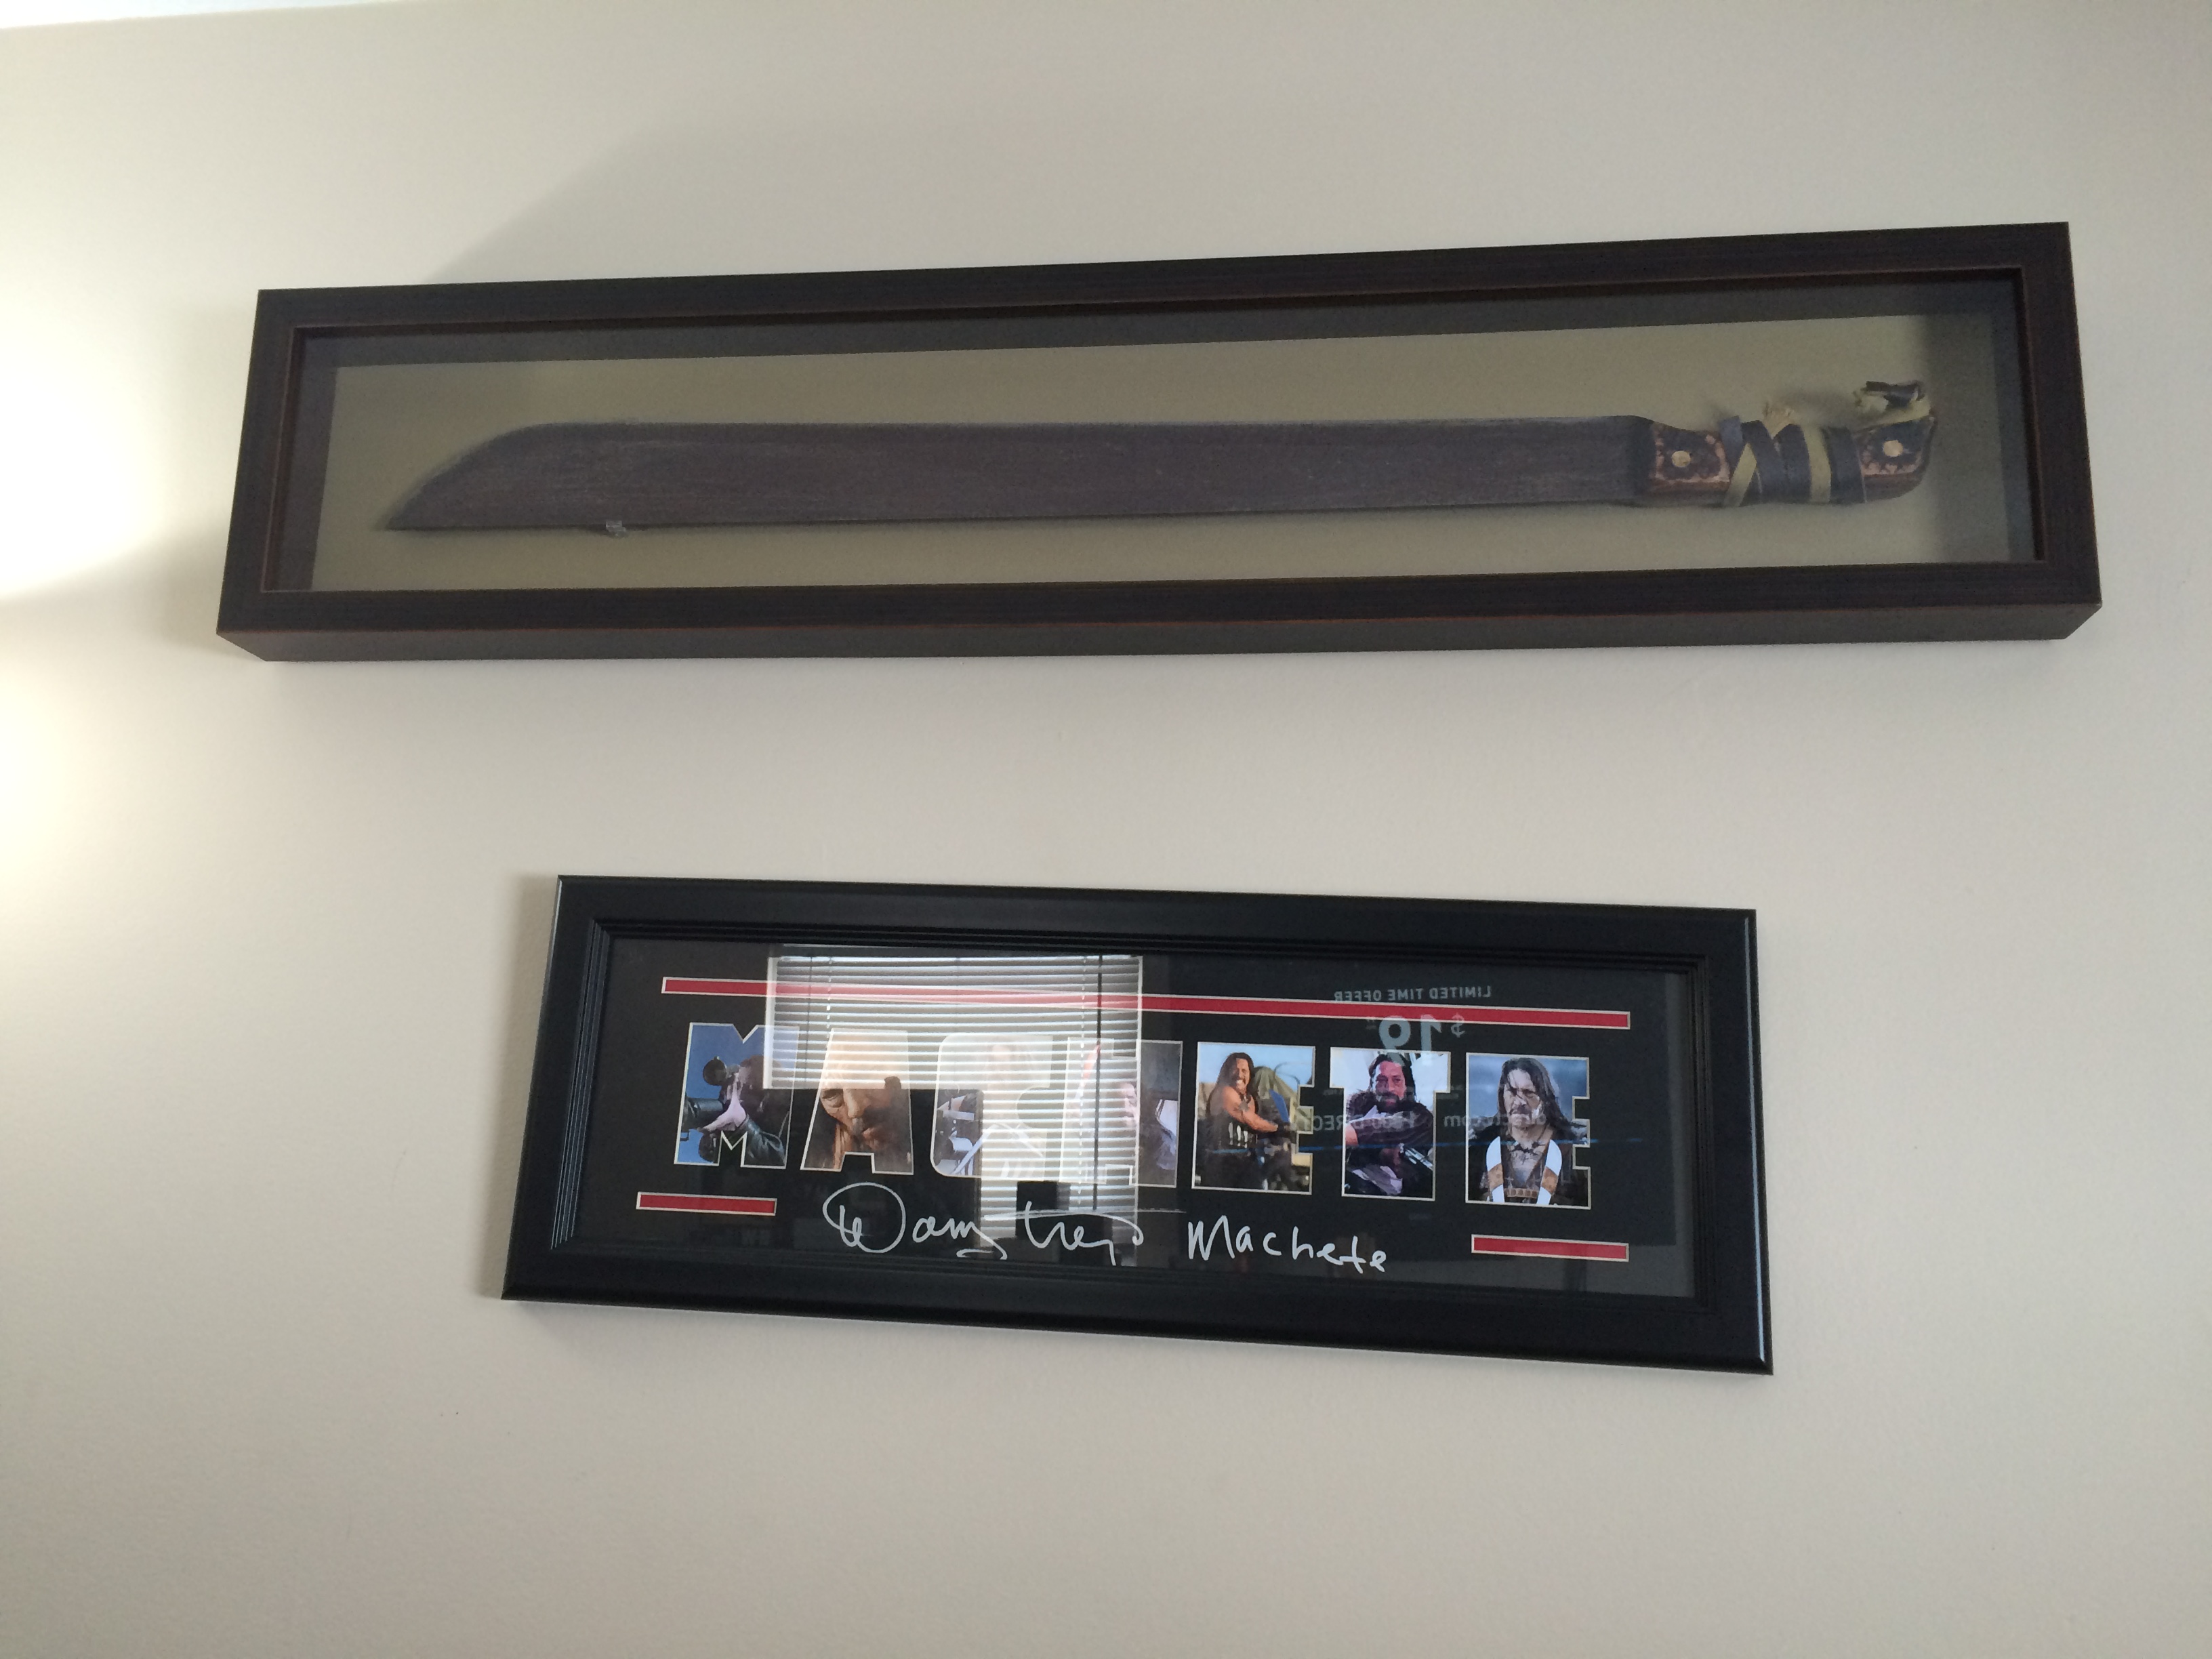 Above is a nicely framed commercially produced replica of a Machete from the remake of Friday the 13th.  Its one of the better replicas I have seen fo